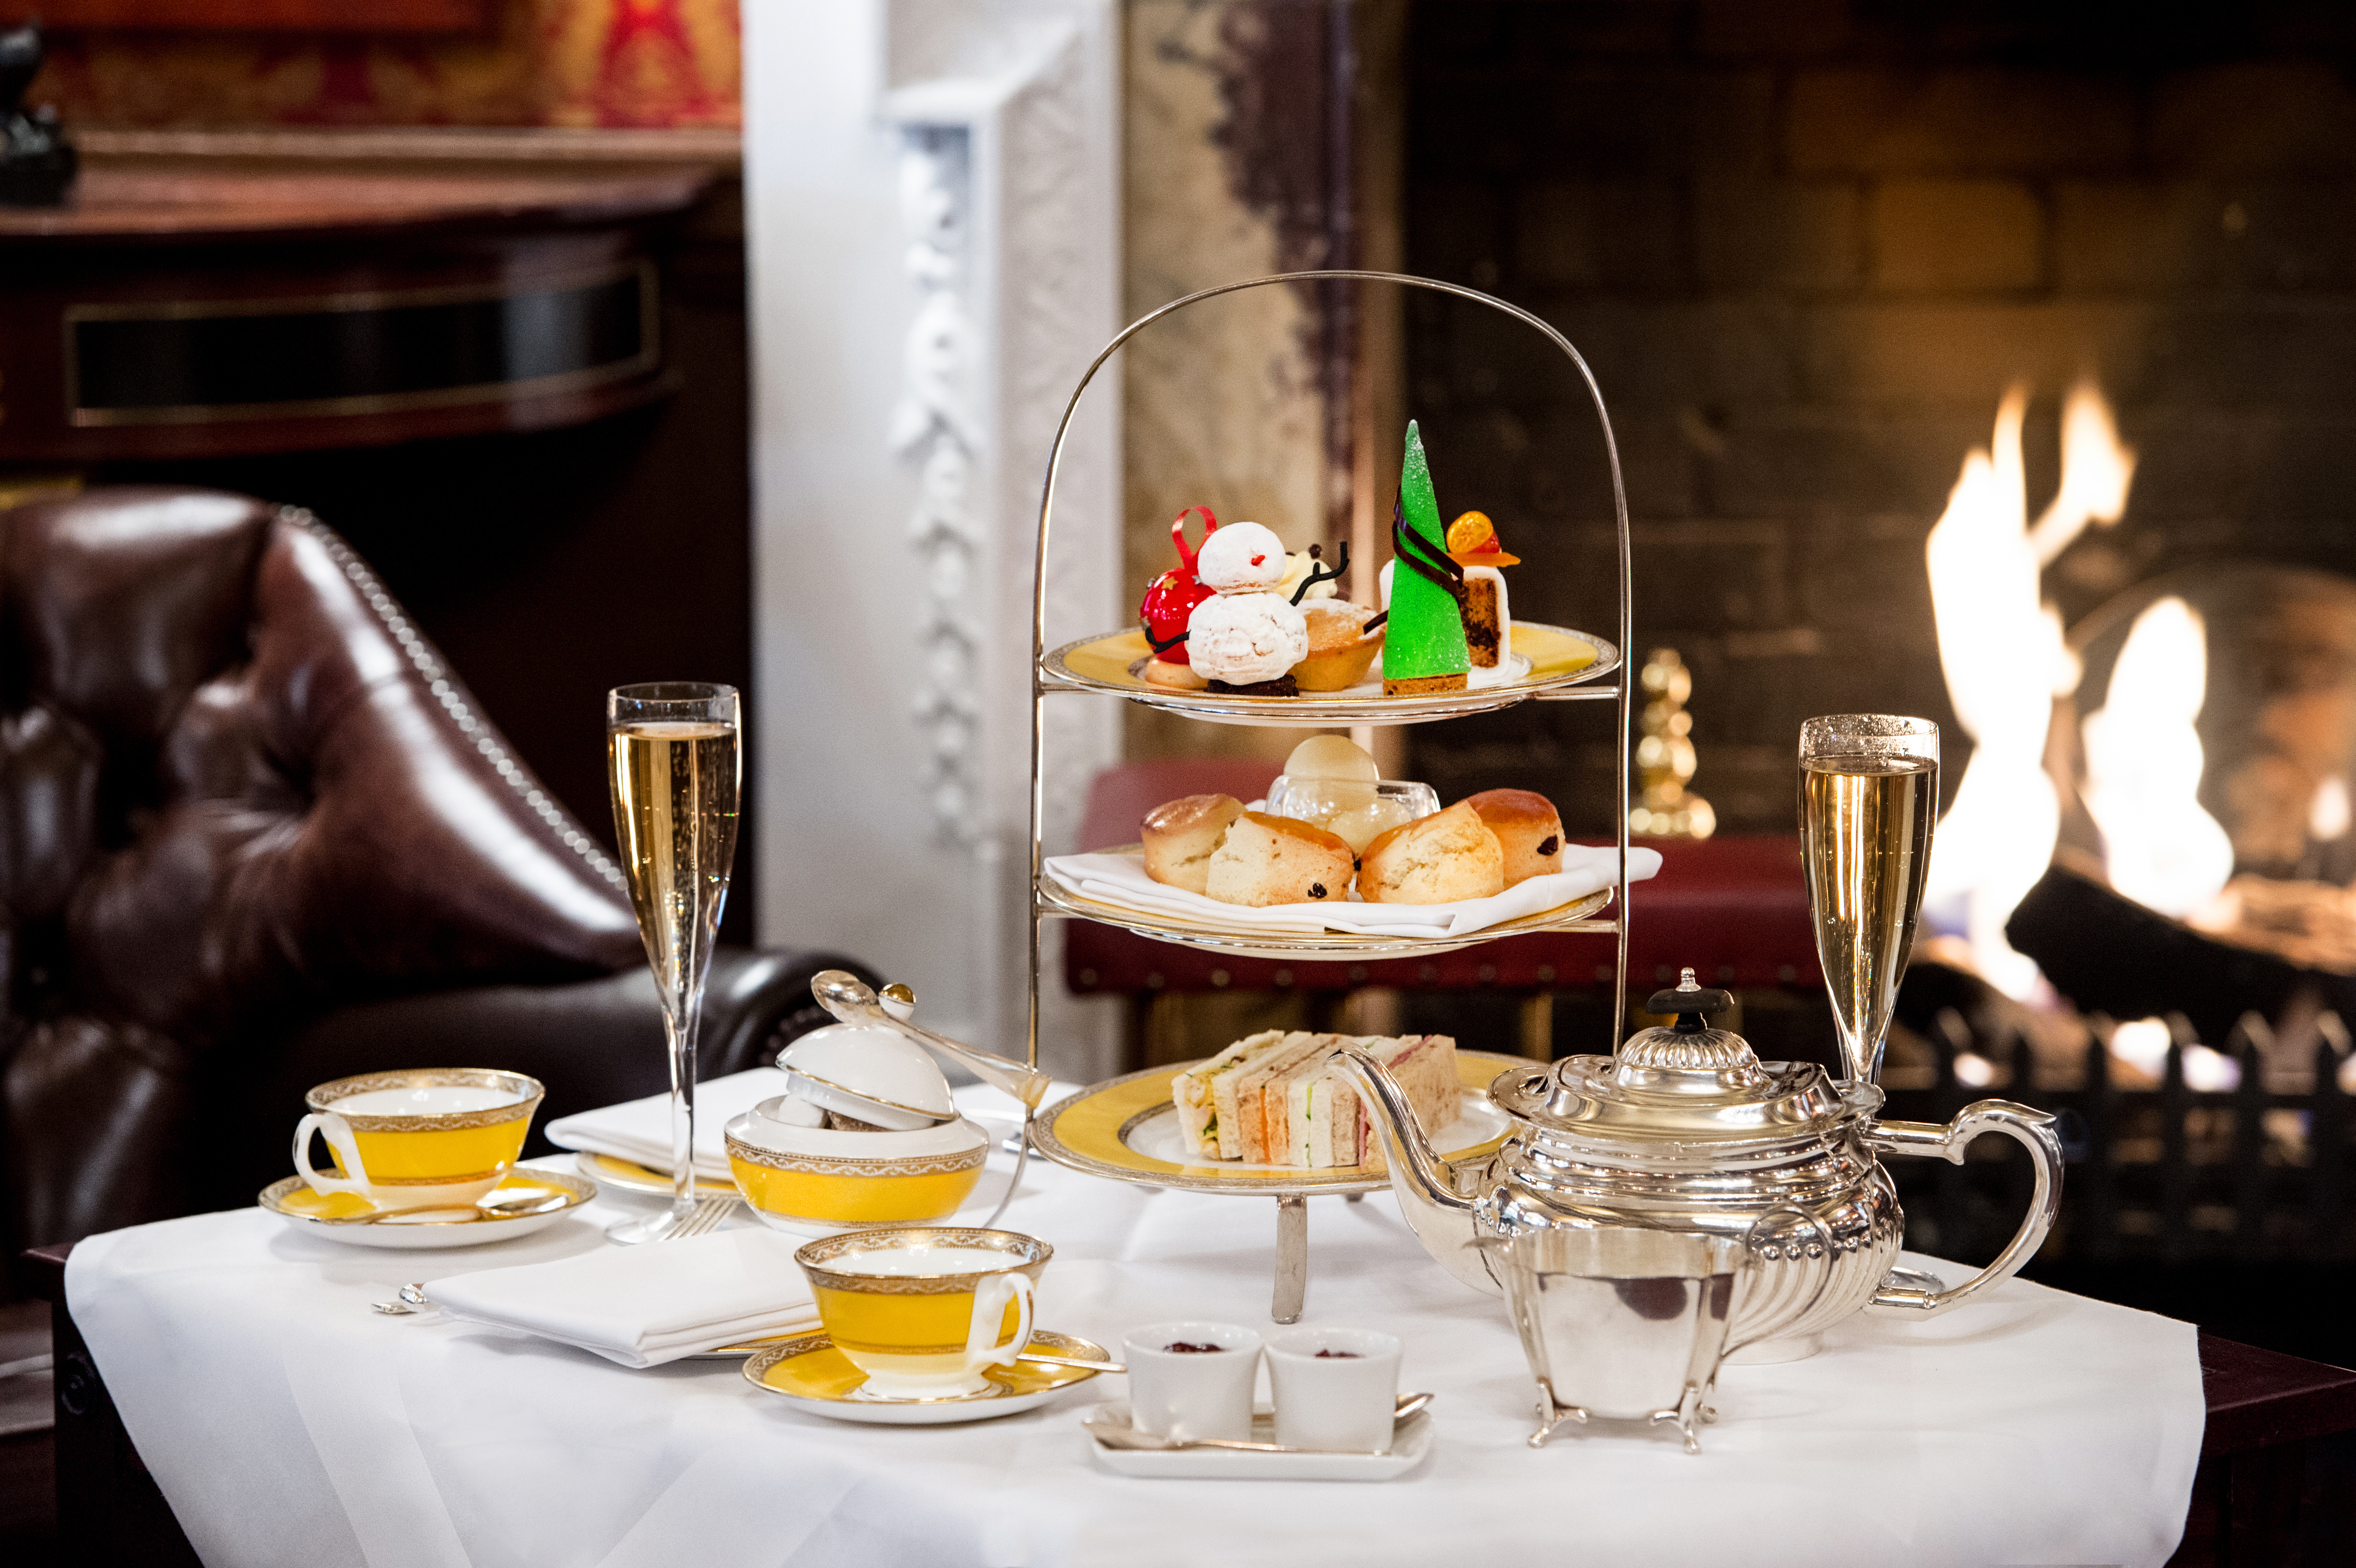 Festive Afternoon tea at The Goring